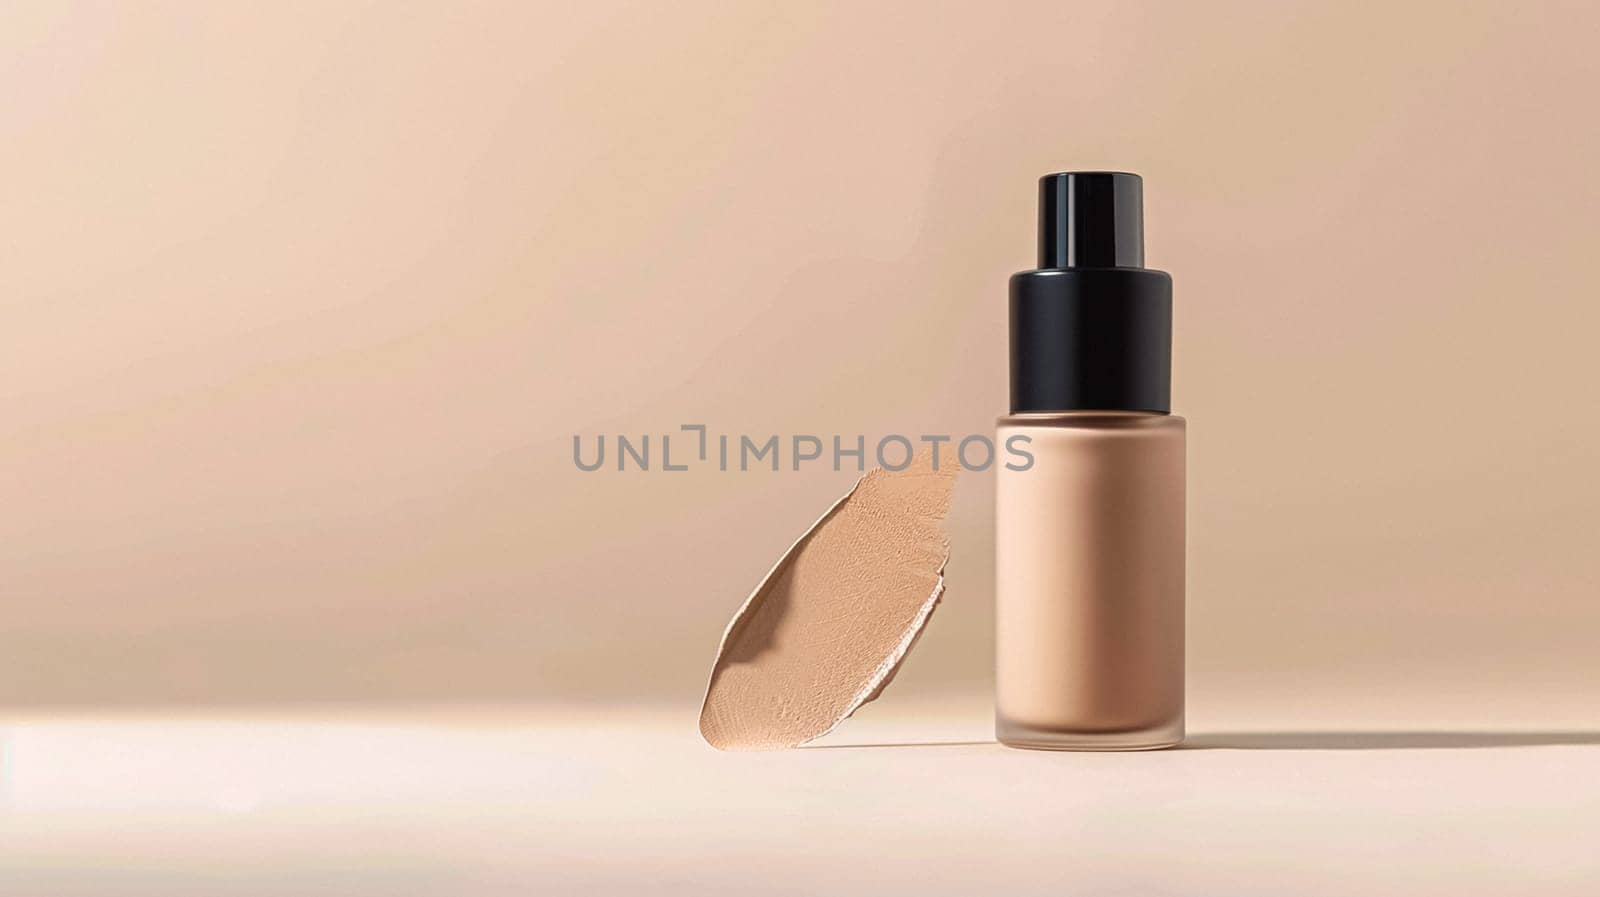 Make-up foundation cosmetics product, beige cosmetic makeup and skincare cream sample as luxury beauty brand design by Anneleven